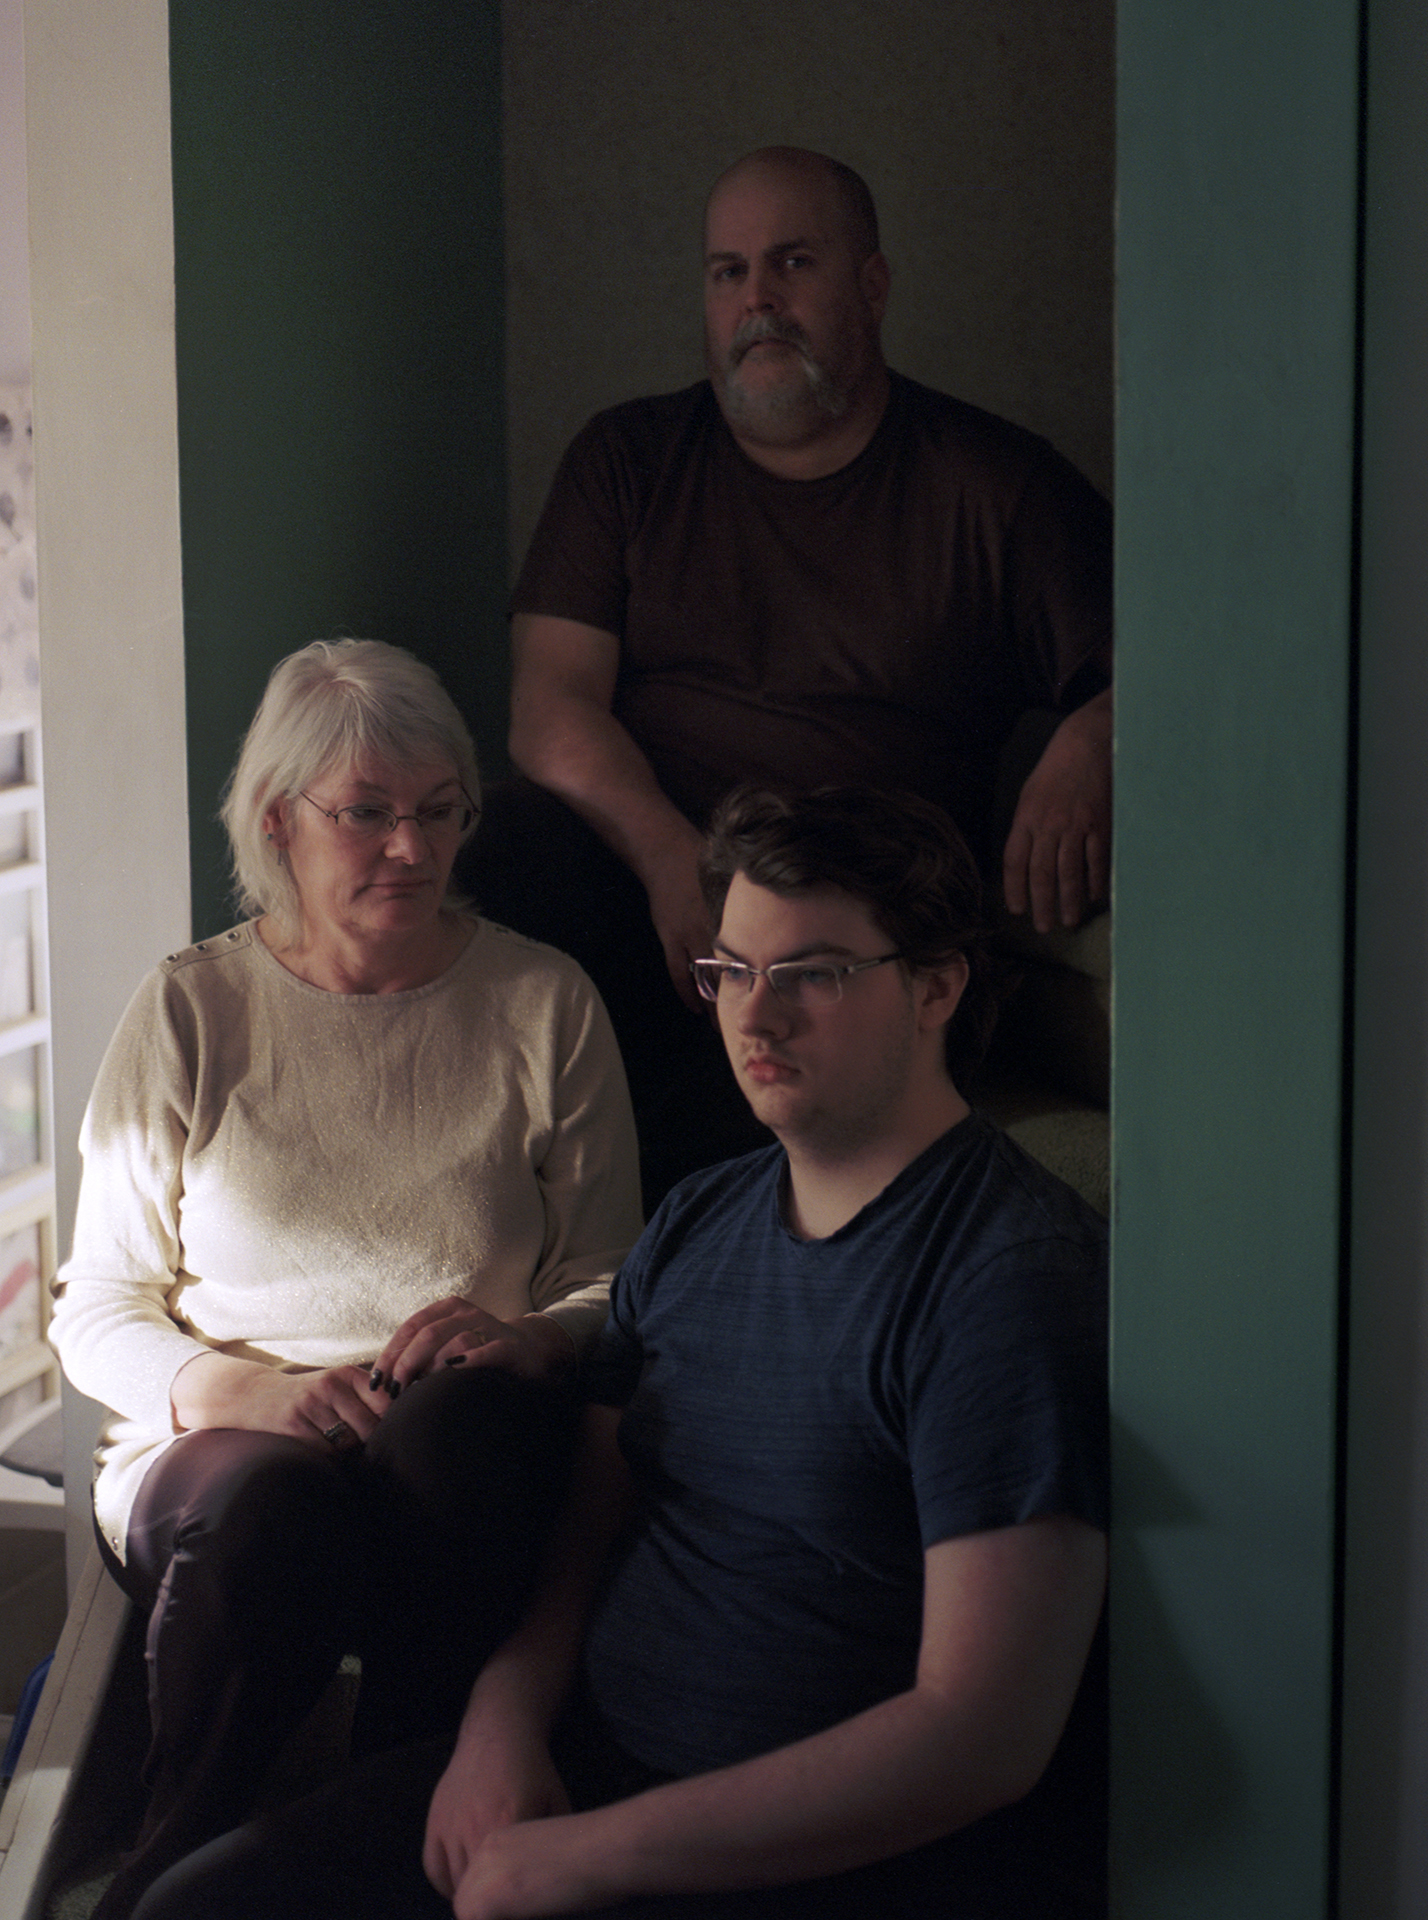 A take on a family portrait as they all sit posed on a staircase, a mother sits hand on lap staring at her son, her son looks off into the distance, and the father confronts the camera.